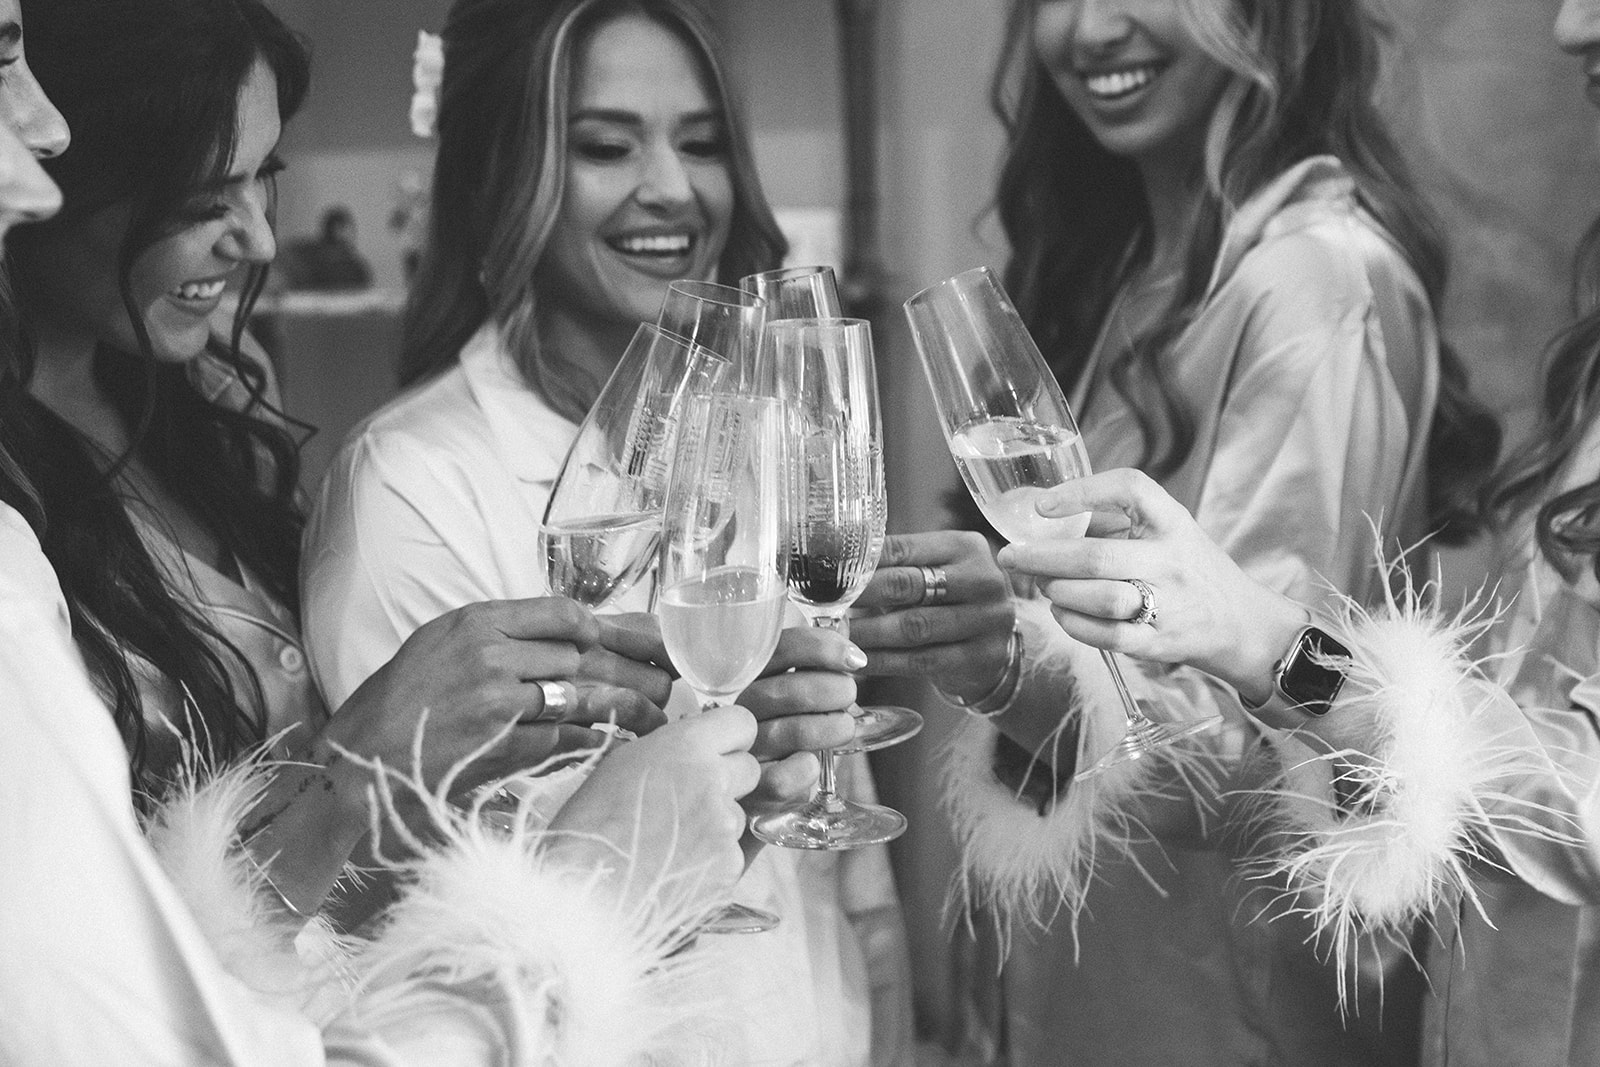 The bride and bridesmaids cheers with champagne in their matching getting ready outfits before wedding day!